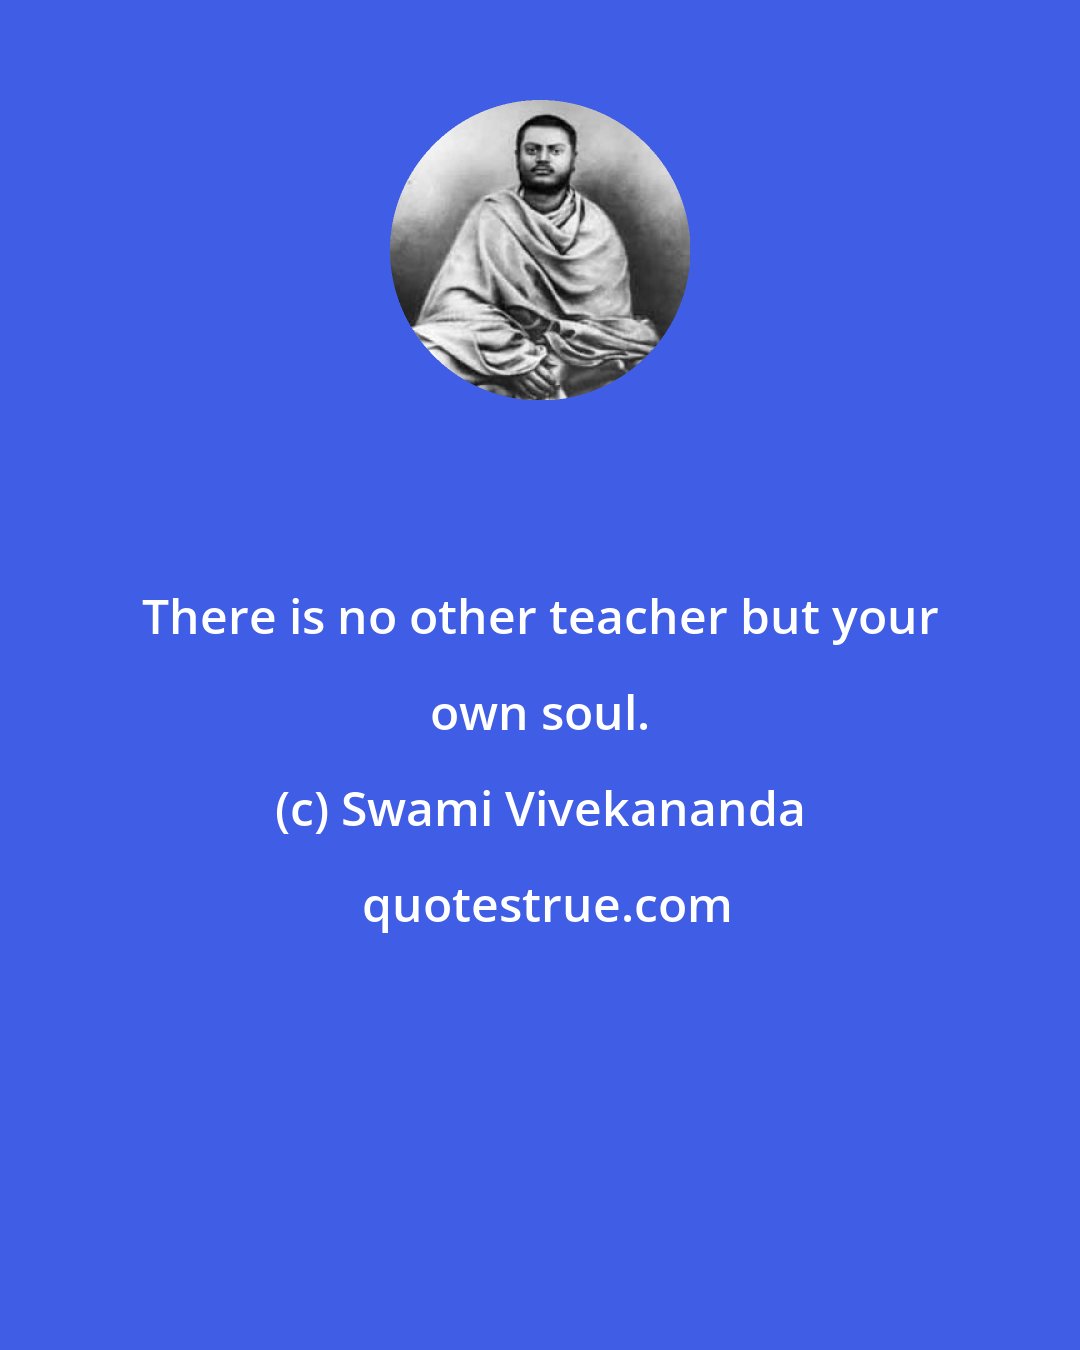 Swami Vivekananda: There is no other teacher but your own soul.